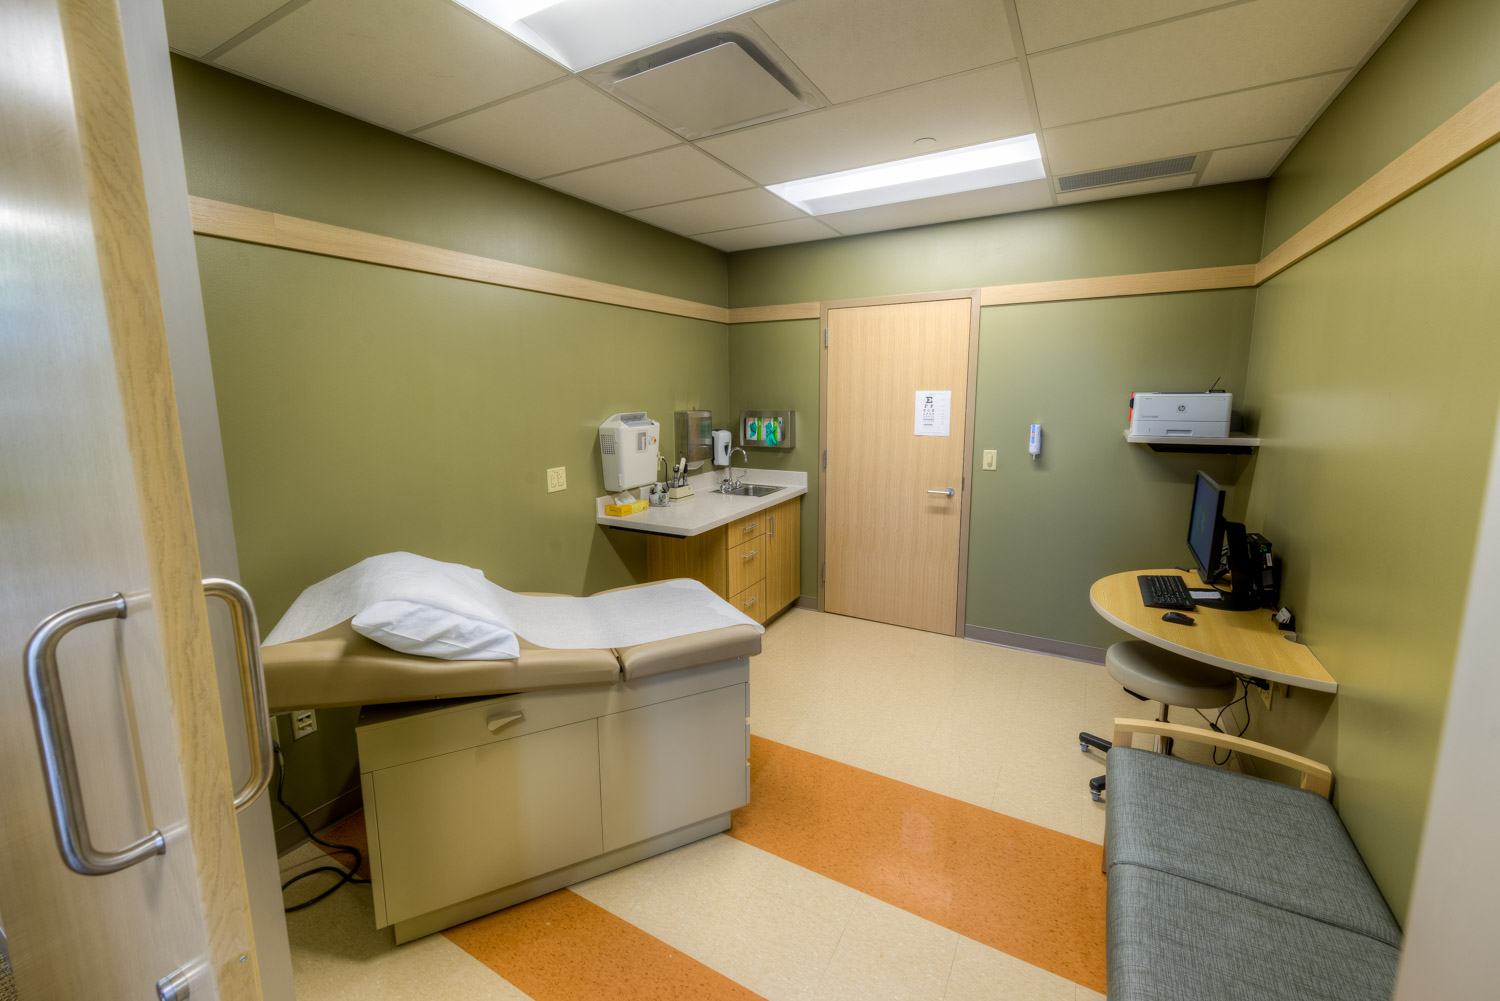 20160918_westernwisconsinhealth_replacementhospital_0507_hdr_150dpi_1500px